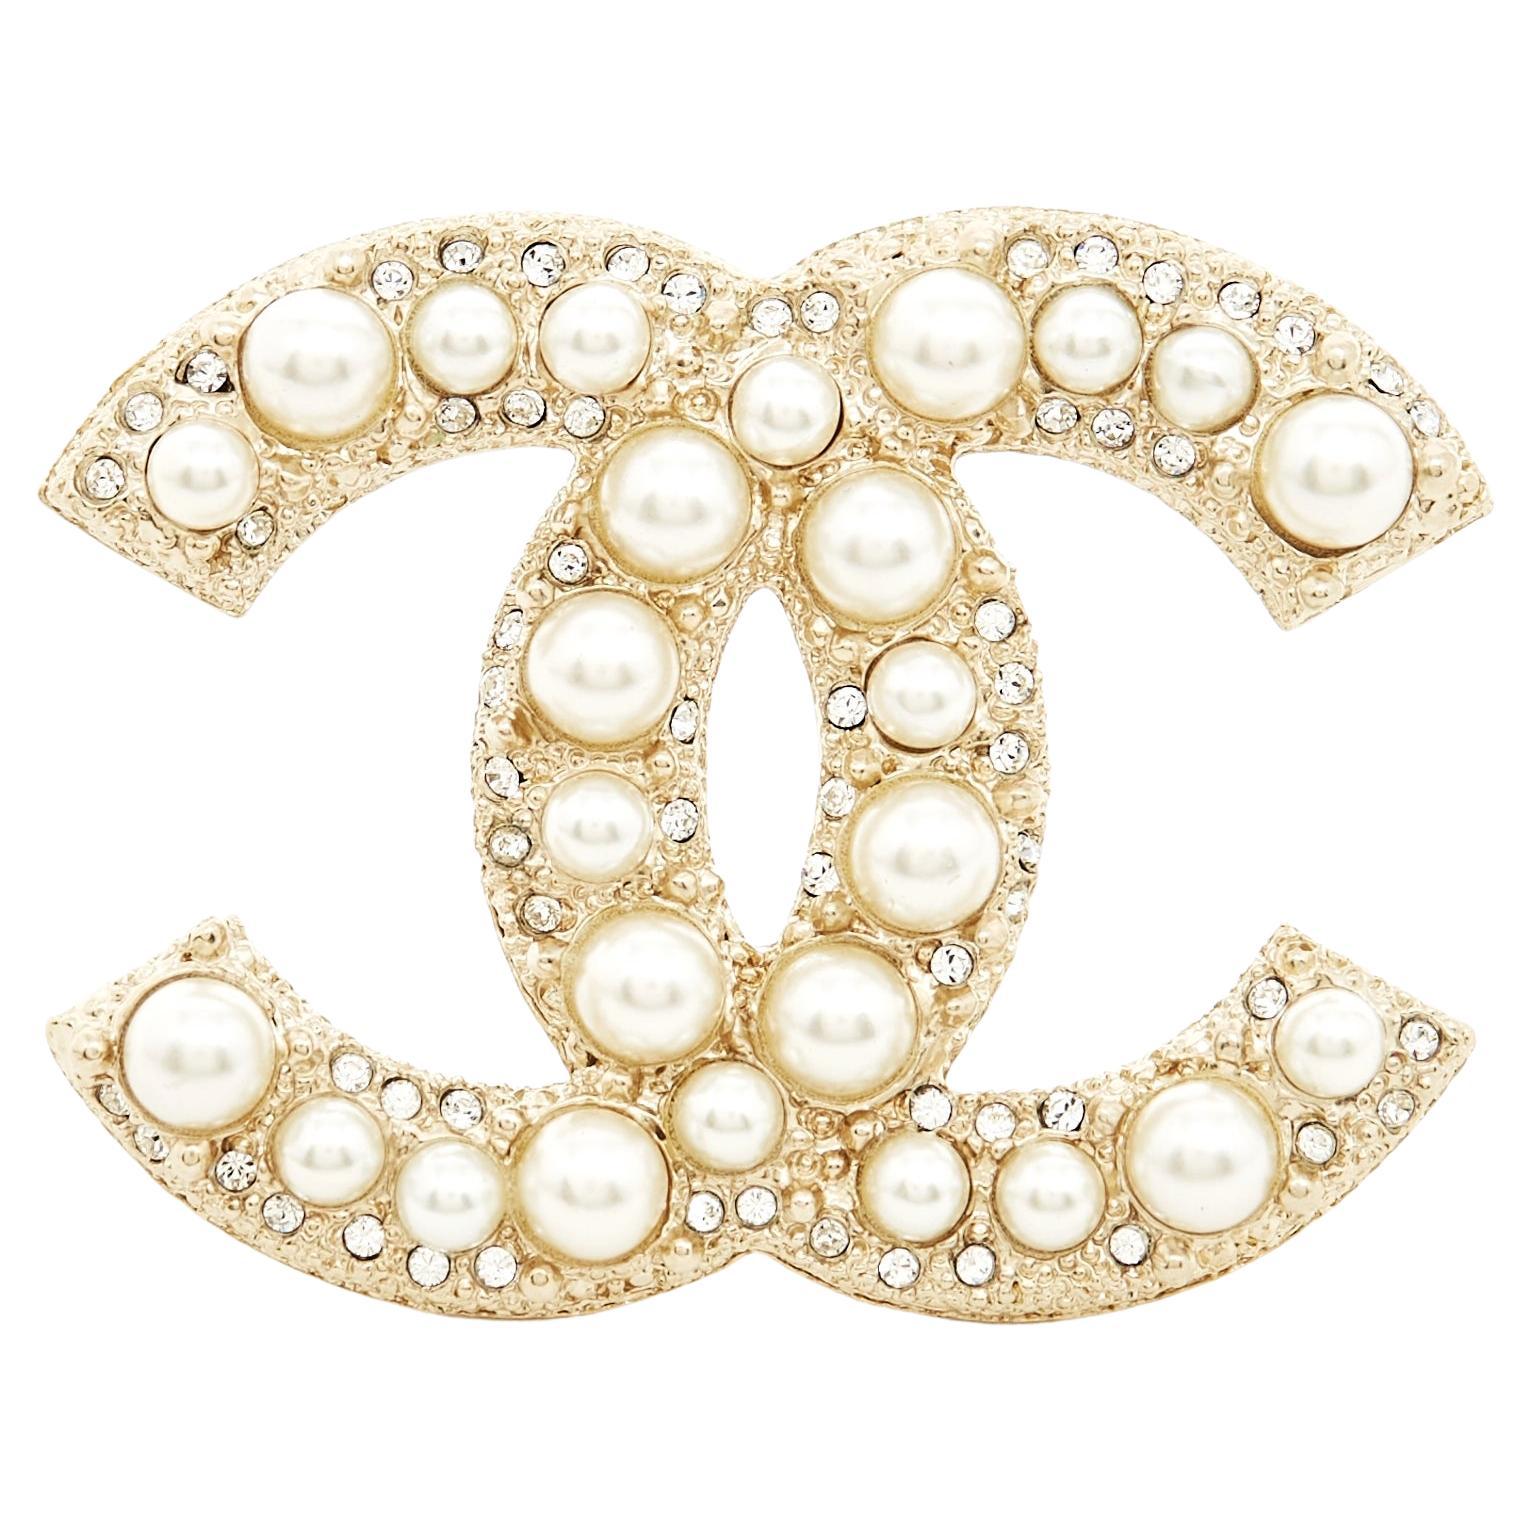 Chanel 17E Brooch CC "Damonds and Pearls"